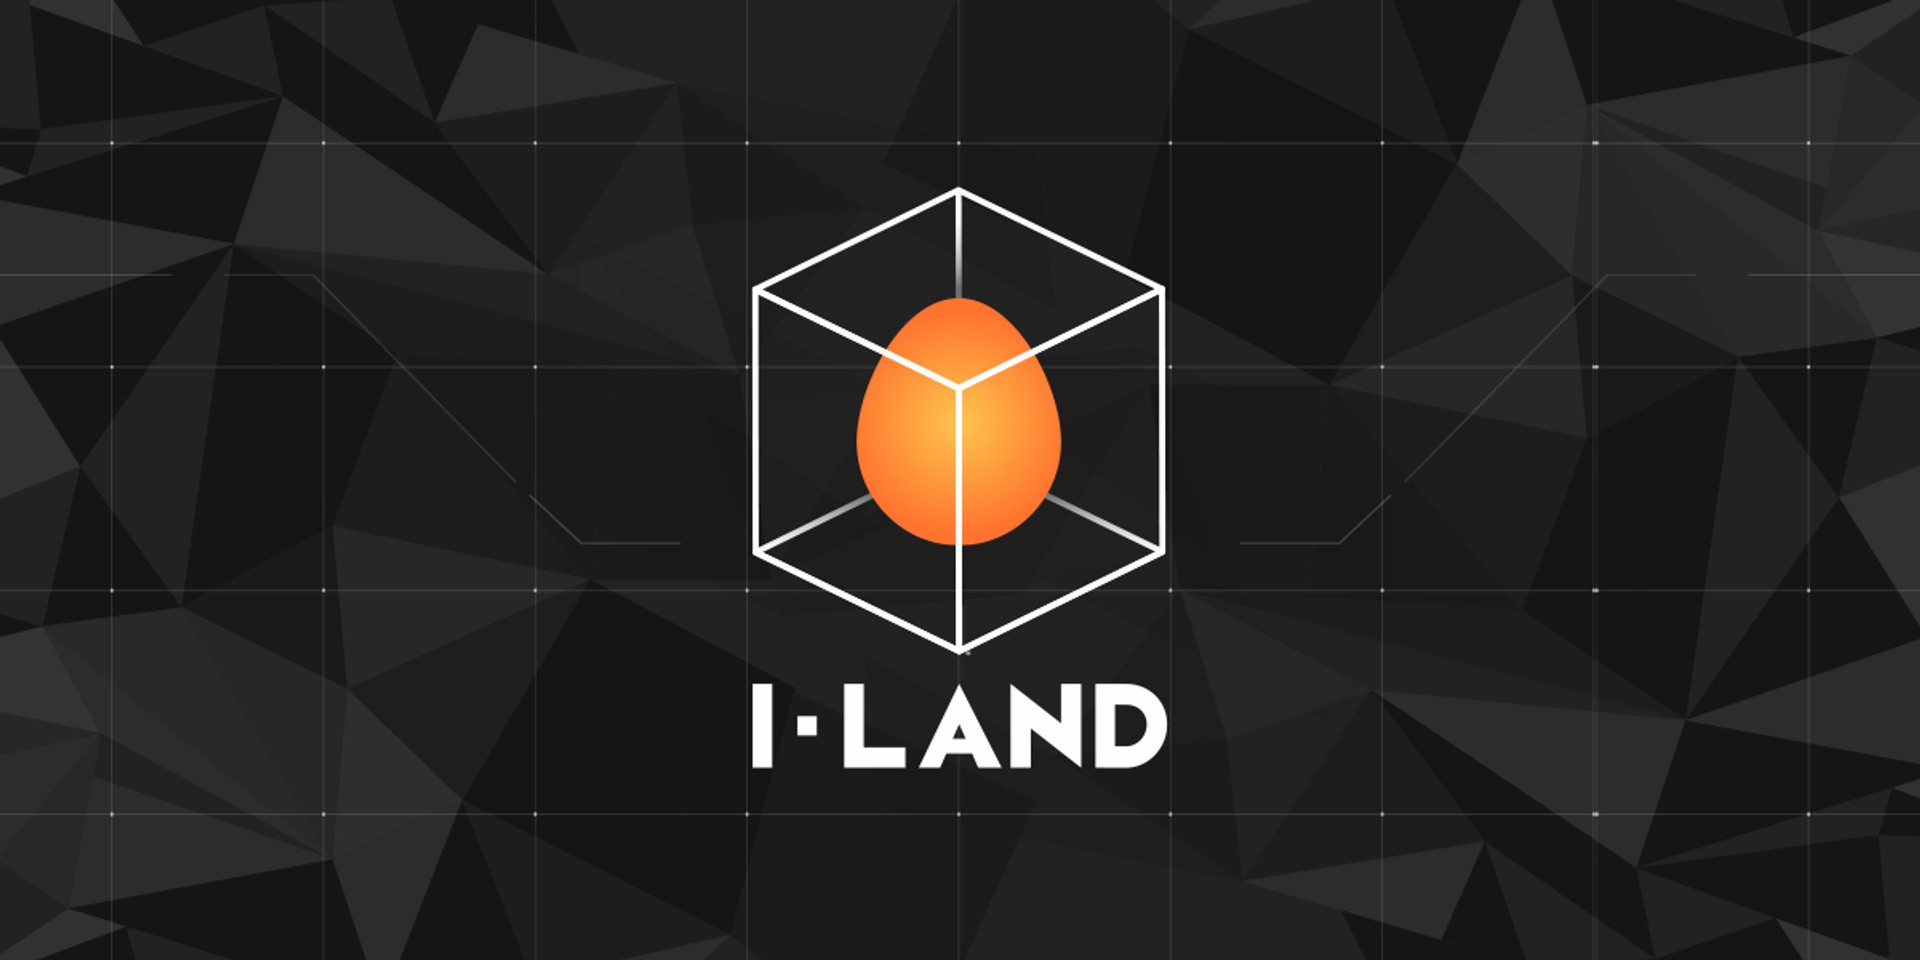 HYBE and Mnet launch search for new girl group in I-LAND 2